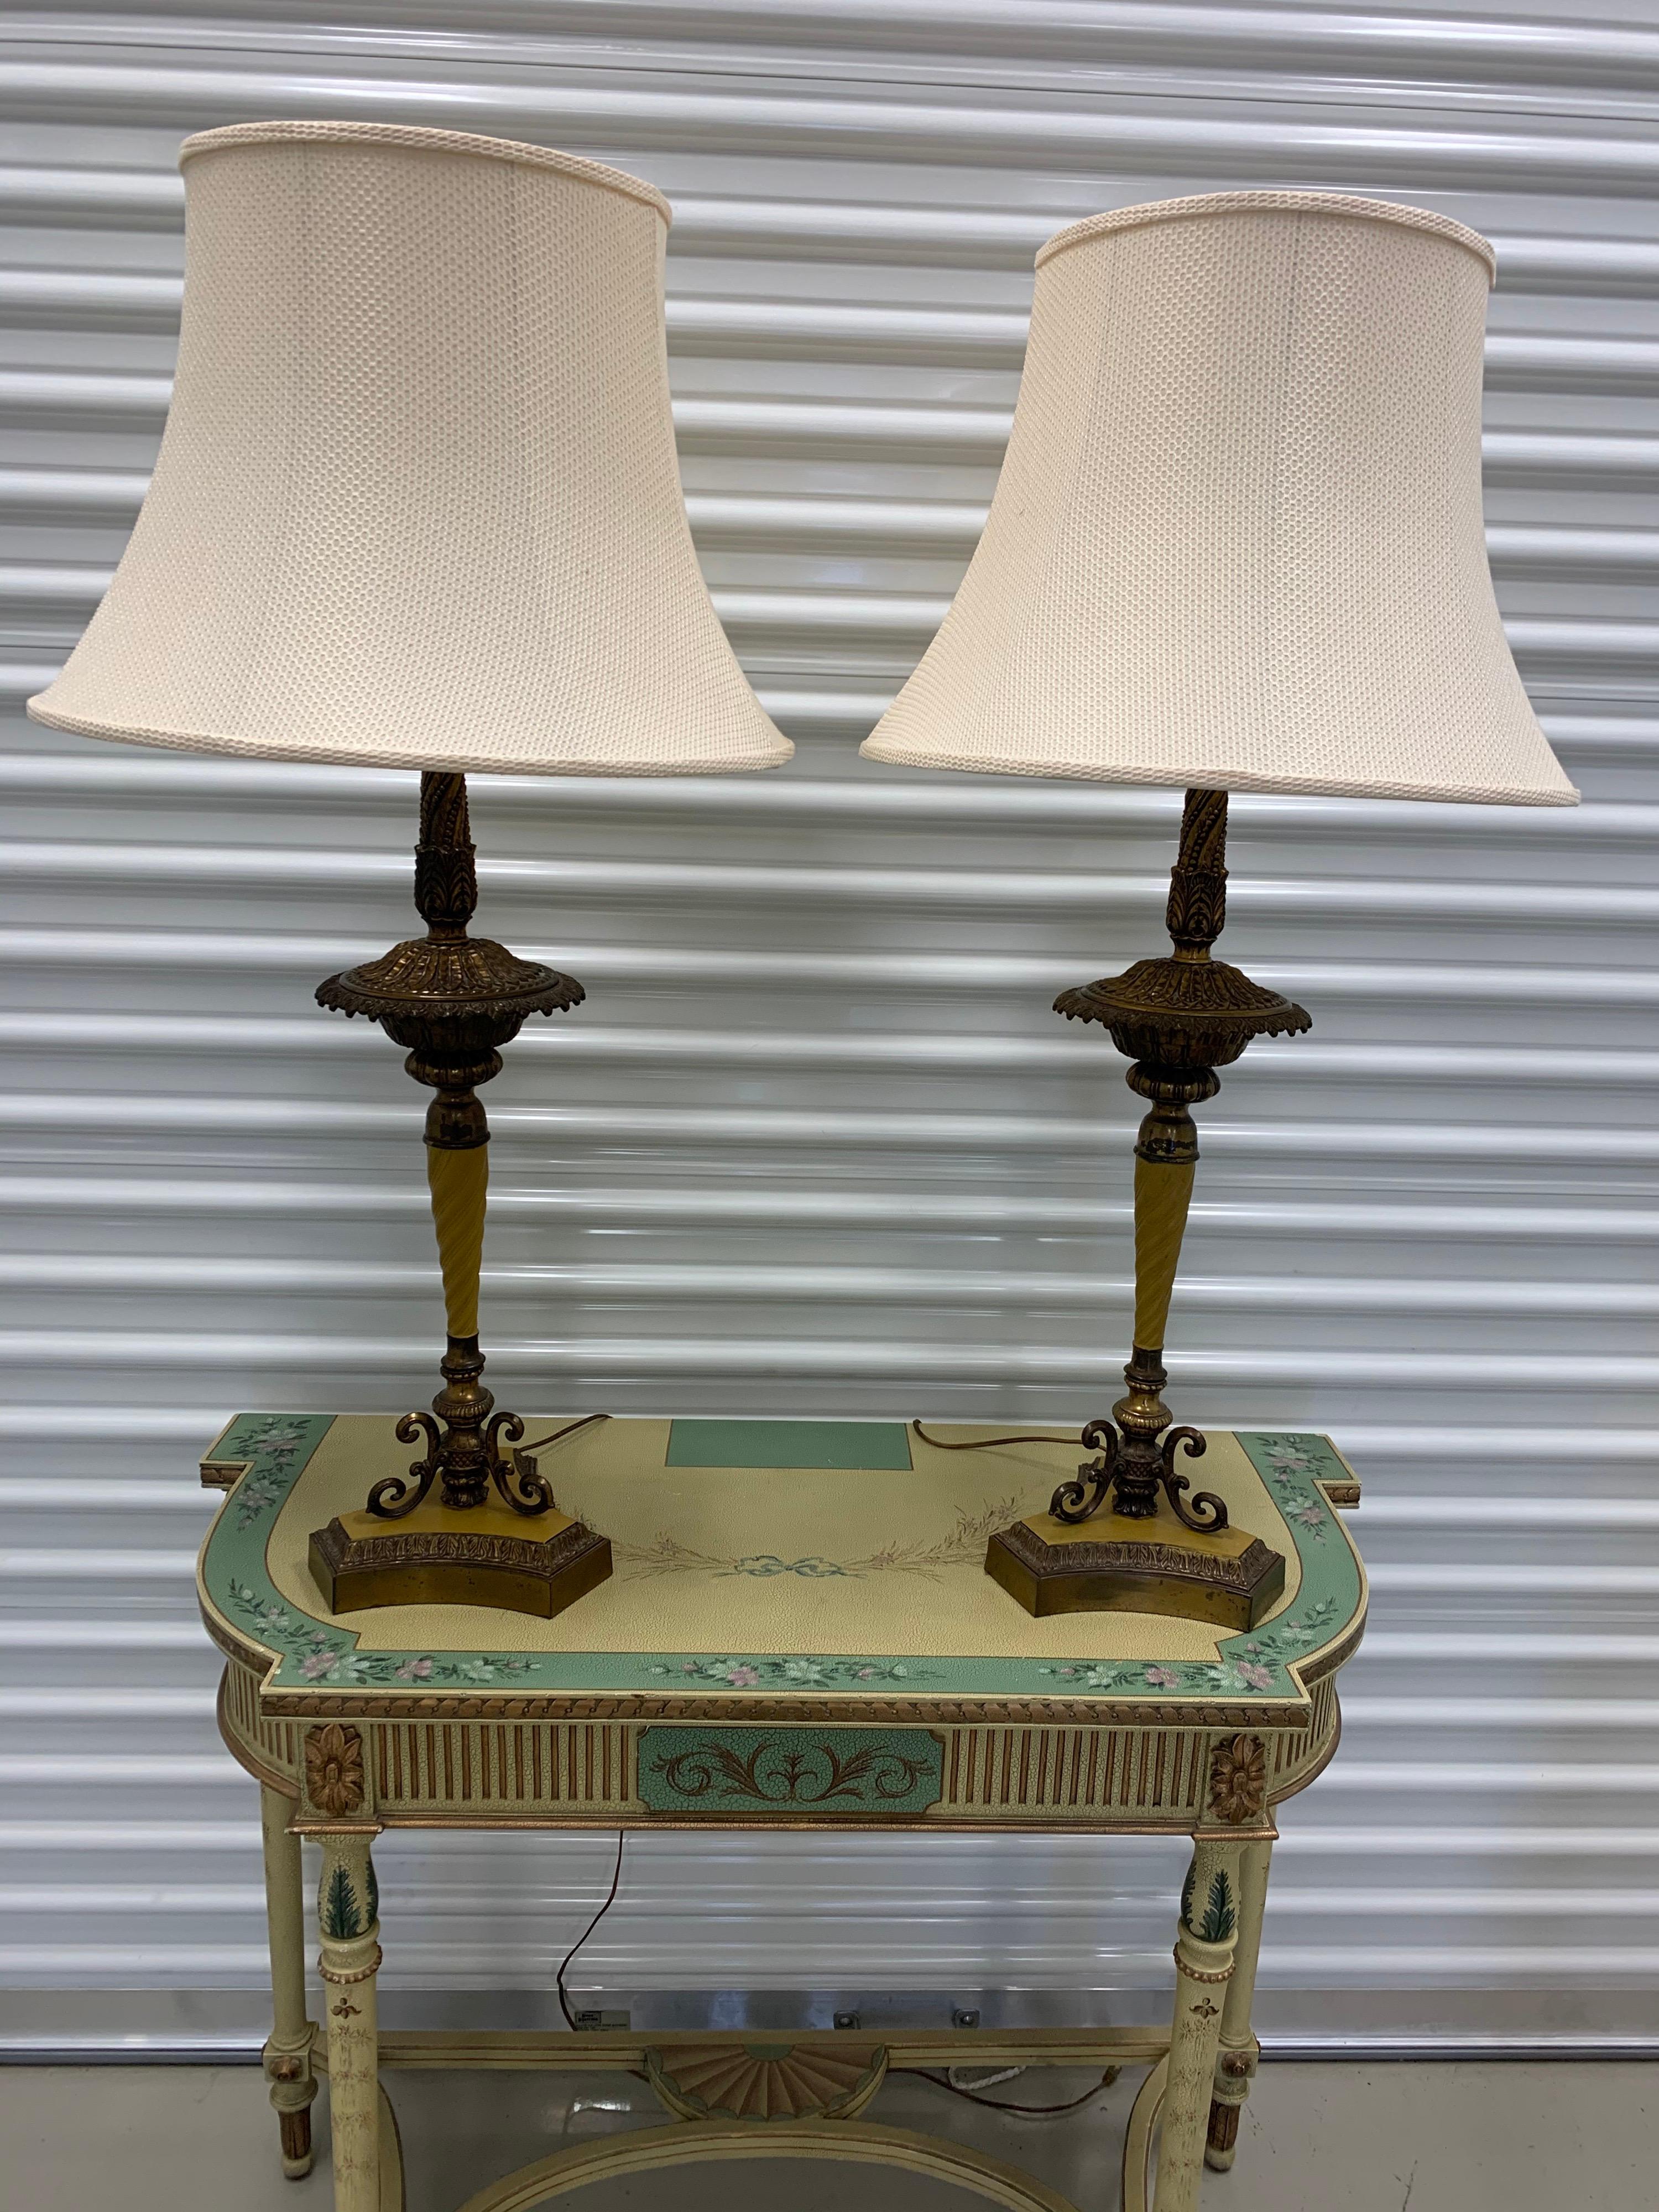 Elegant pair of neoclassical two light table lamps. They are hand painted and the color is unusual, almost a light butterscotch - see pictures. Shades are original and a cream color. Two bulbs sockets in each matching lamp. Wired for USA and in